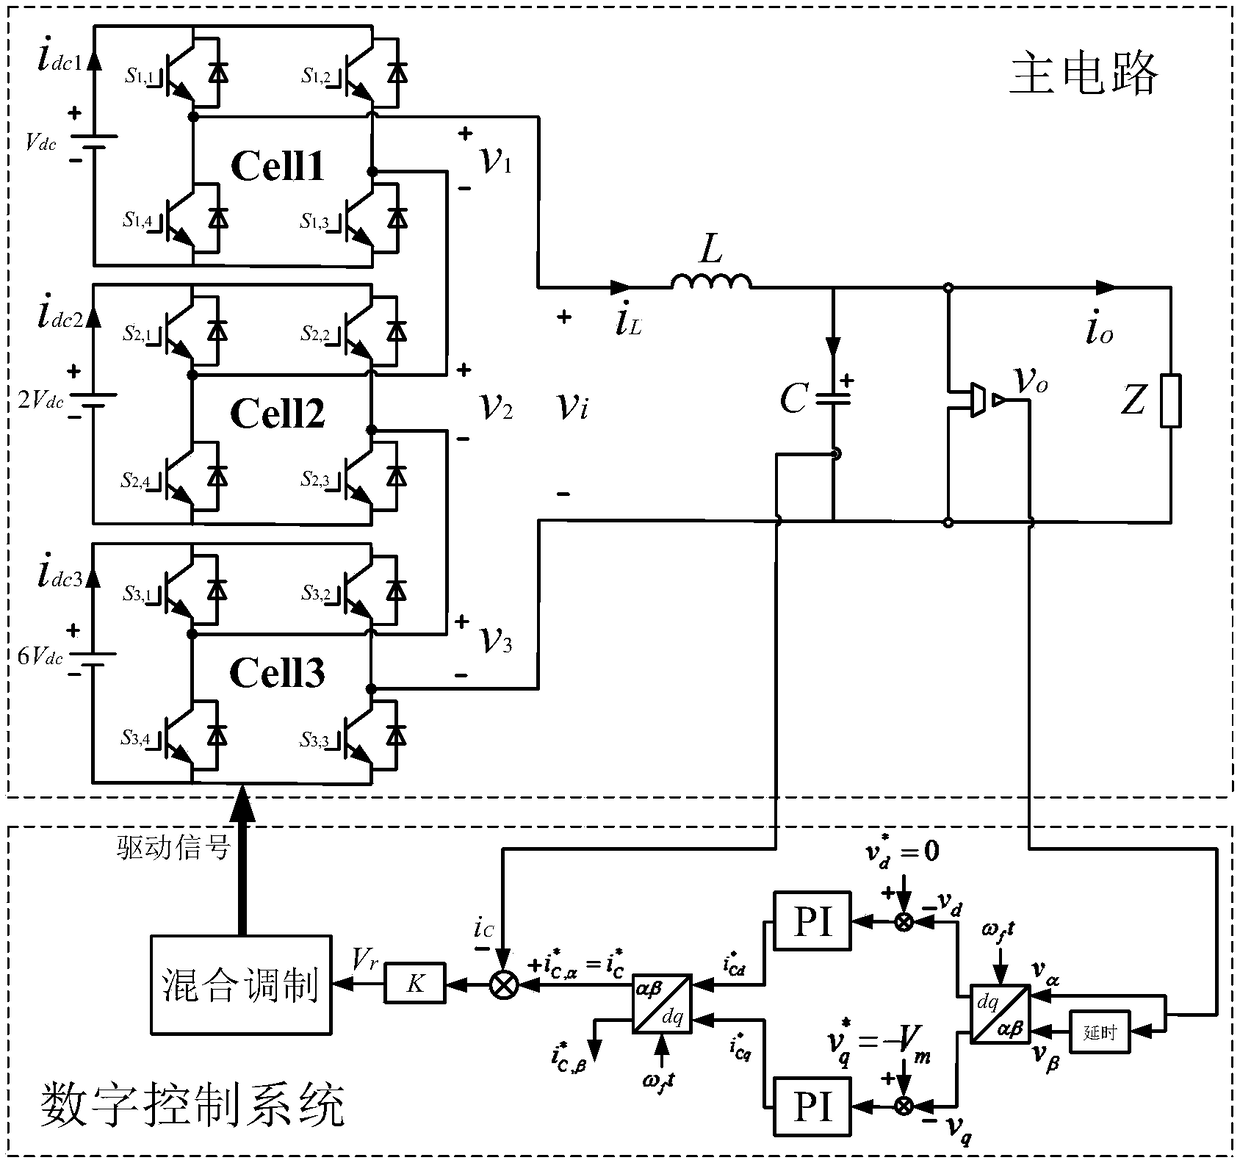 Small signal modeling and stability analysis method of single-phase cascaded island inverter system